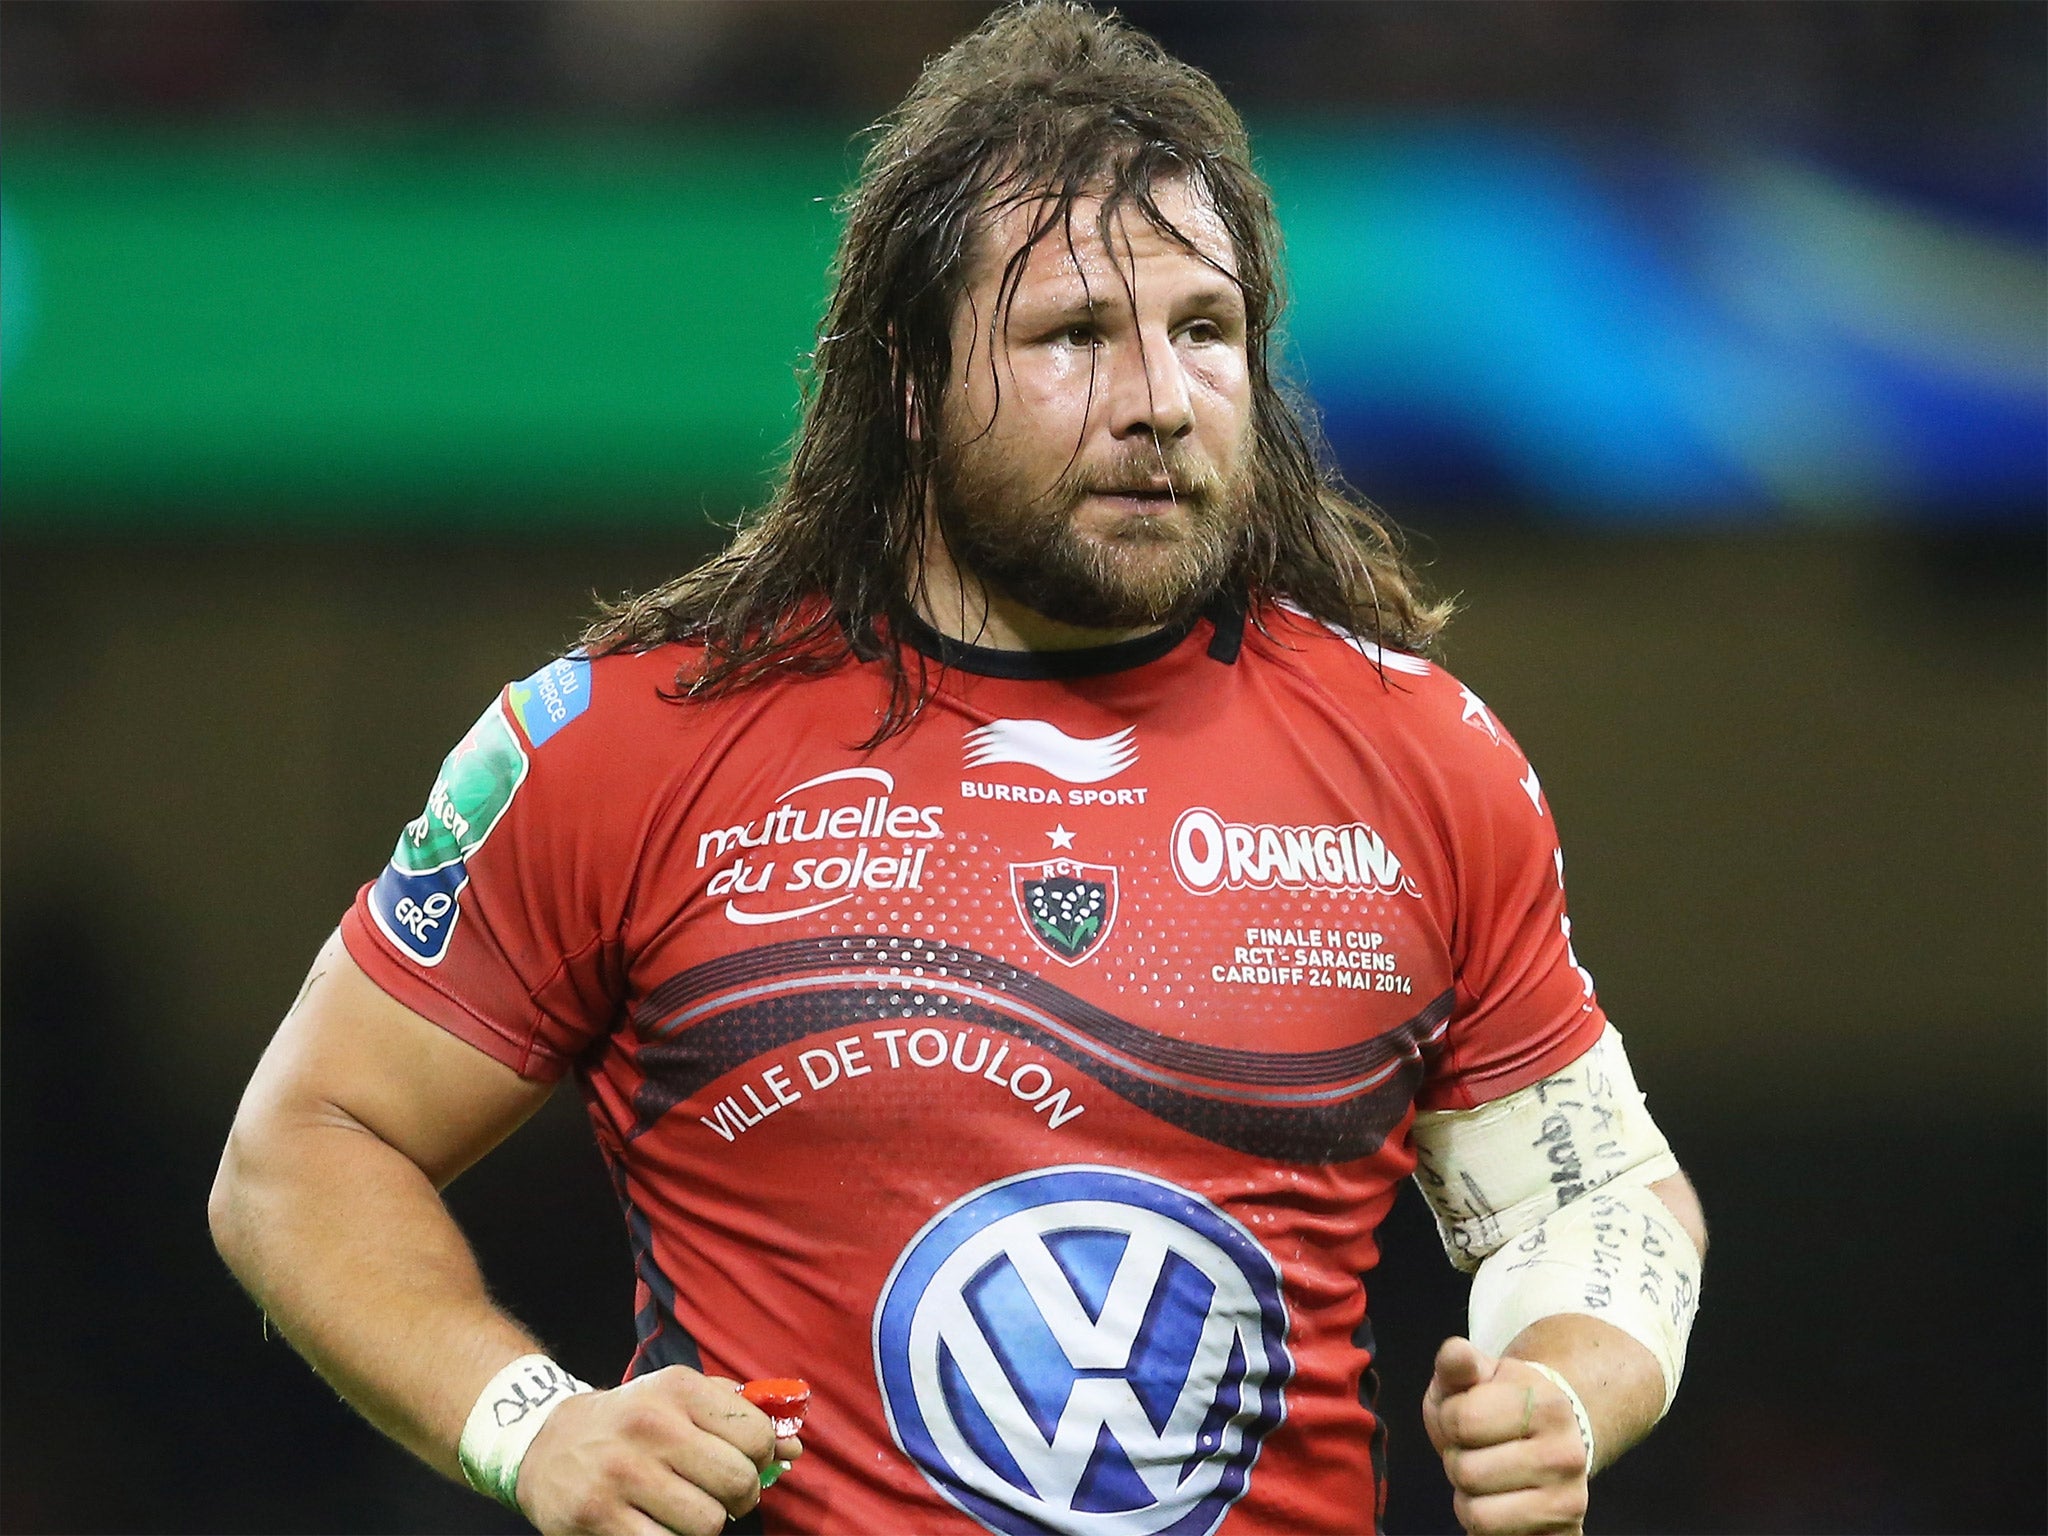 Martin Castrogiovanni was handed a four-match ban, suspended till April 2016, and must pay a Leicester charity €10,000